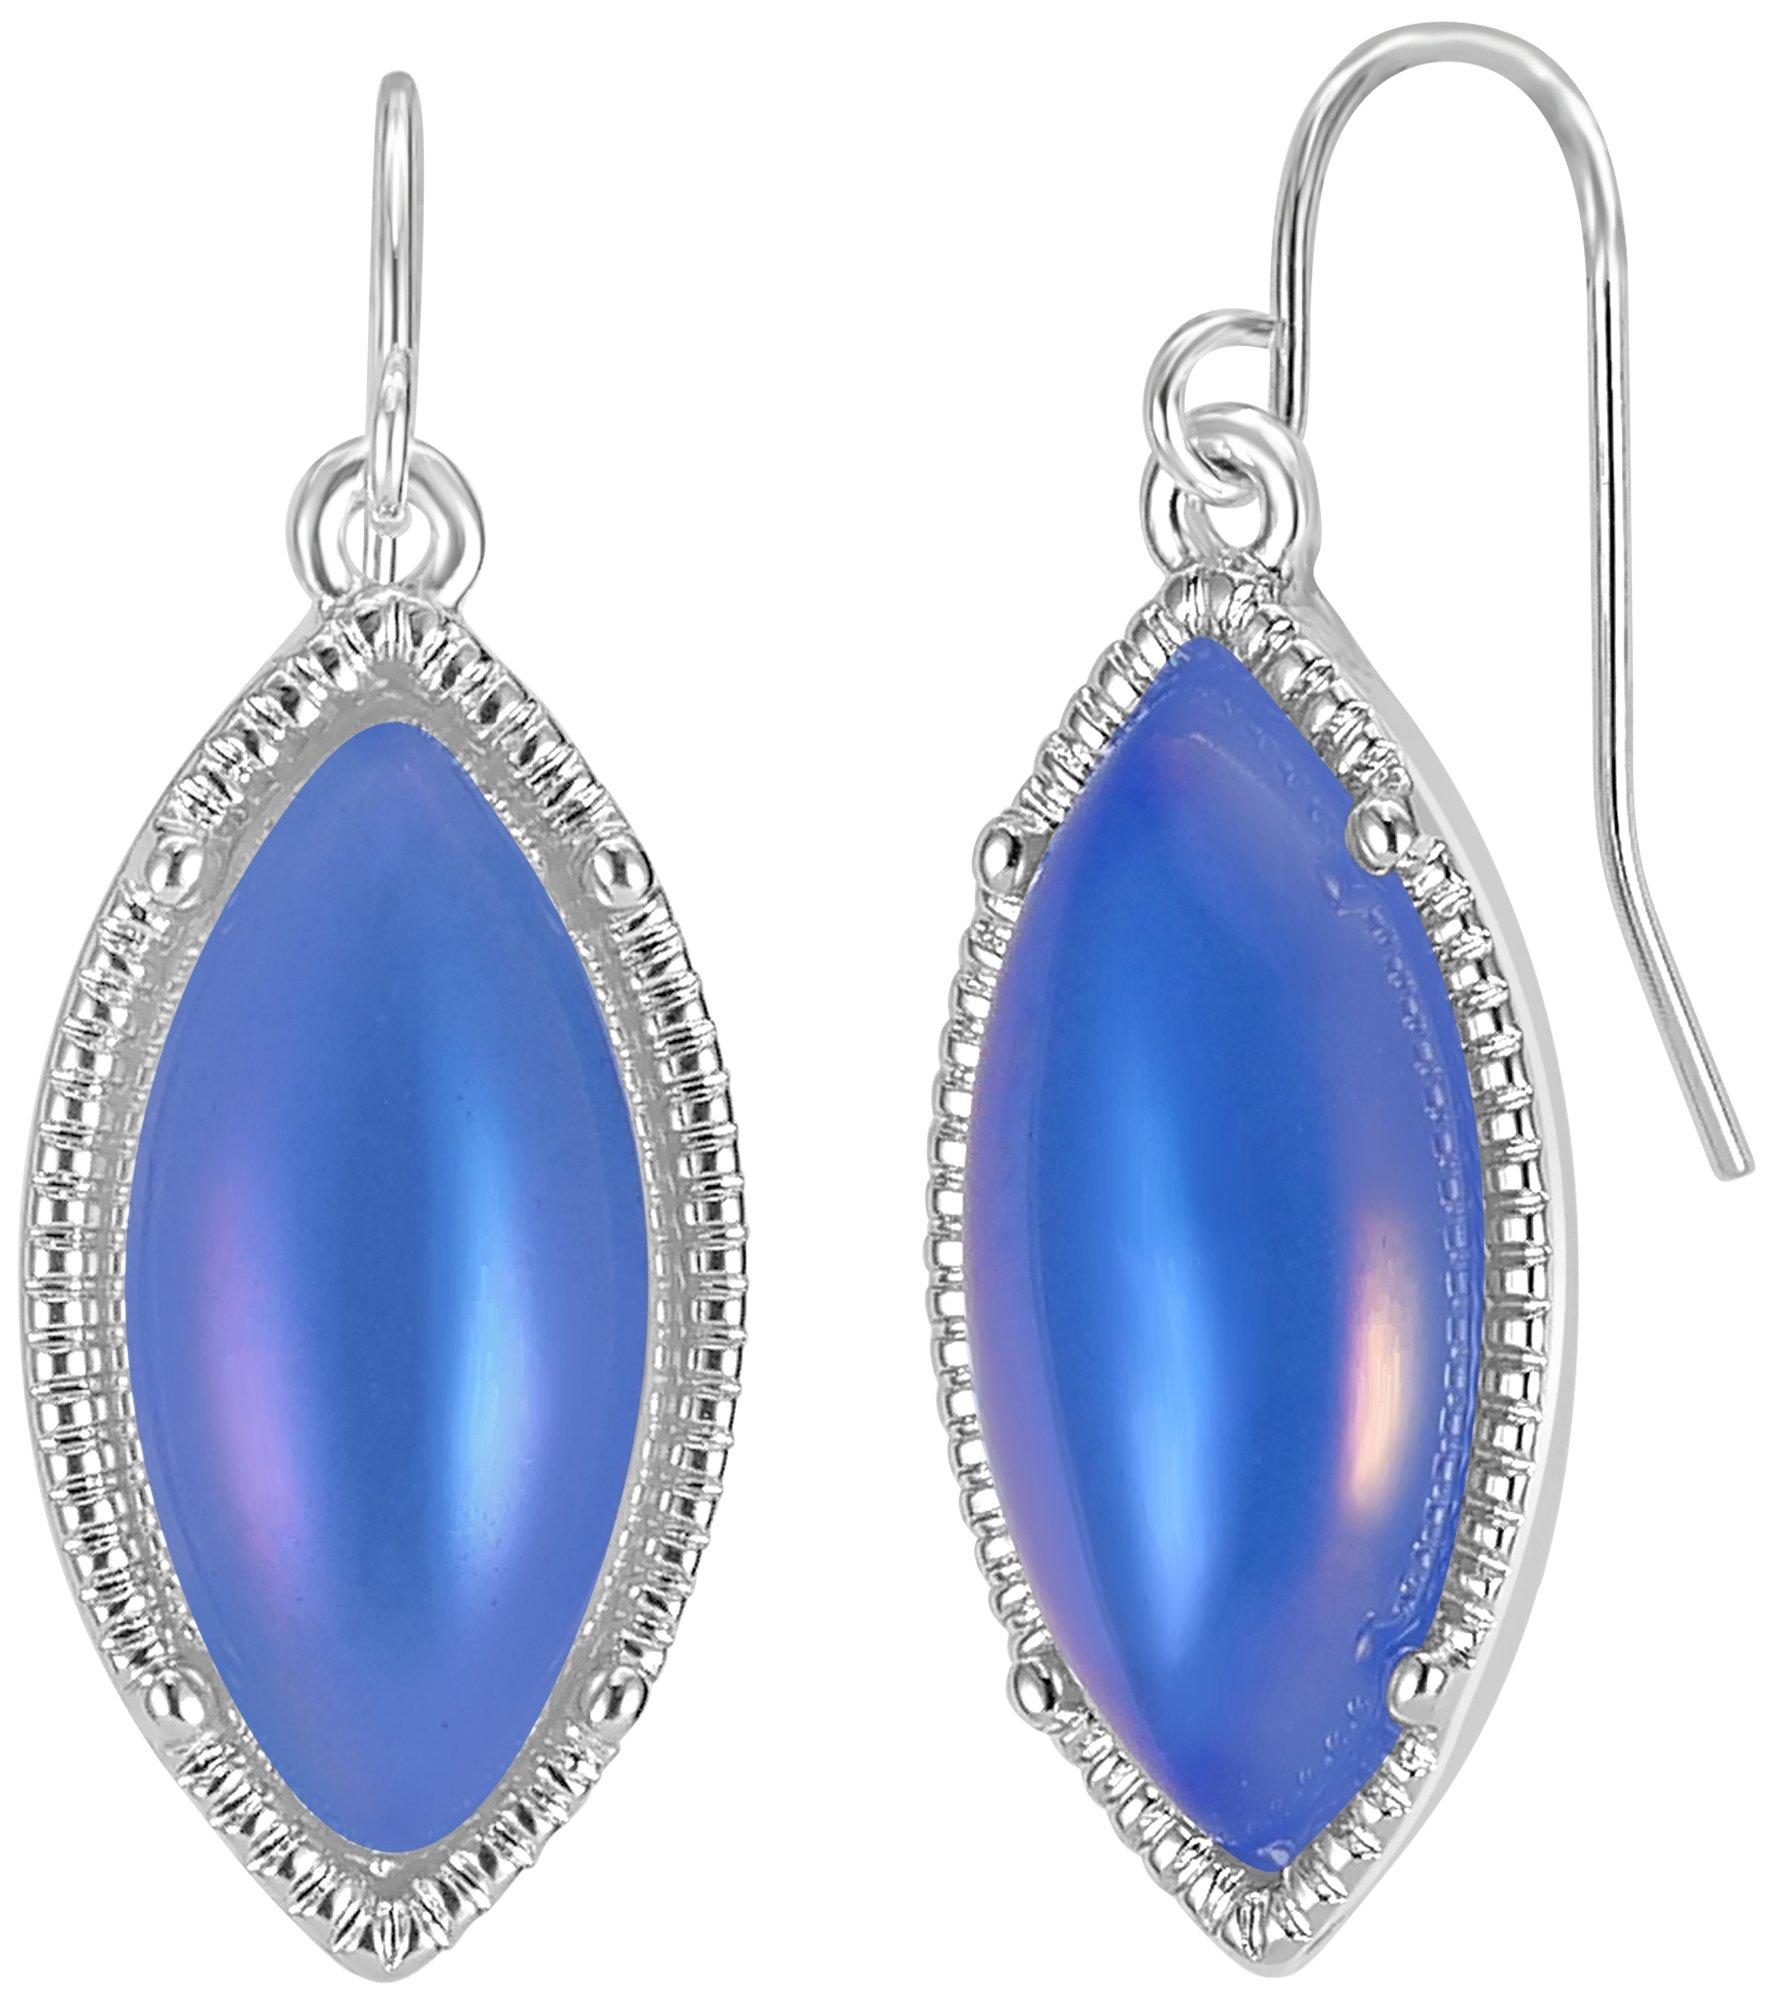 1.25 In. Cabochon Marquise Dangle Earrings